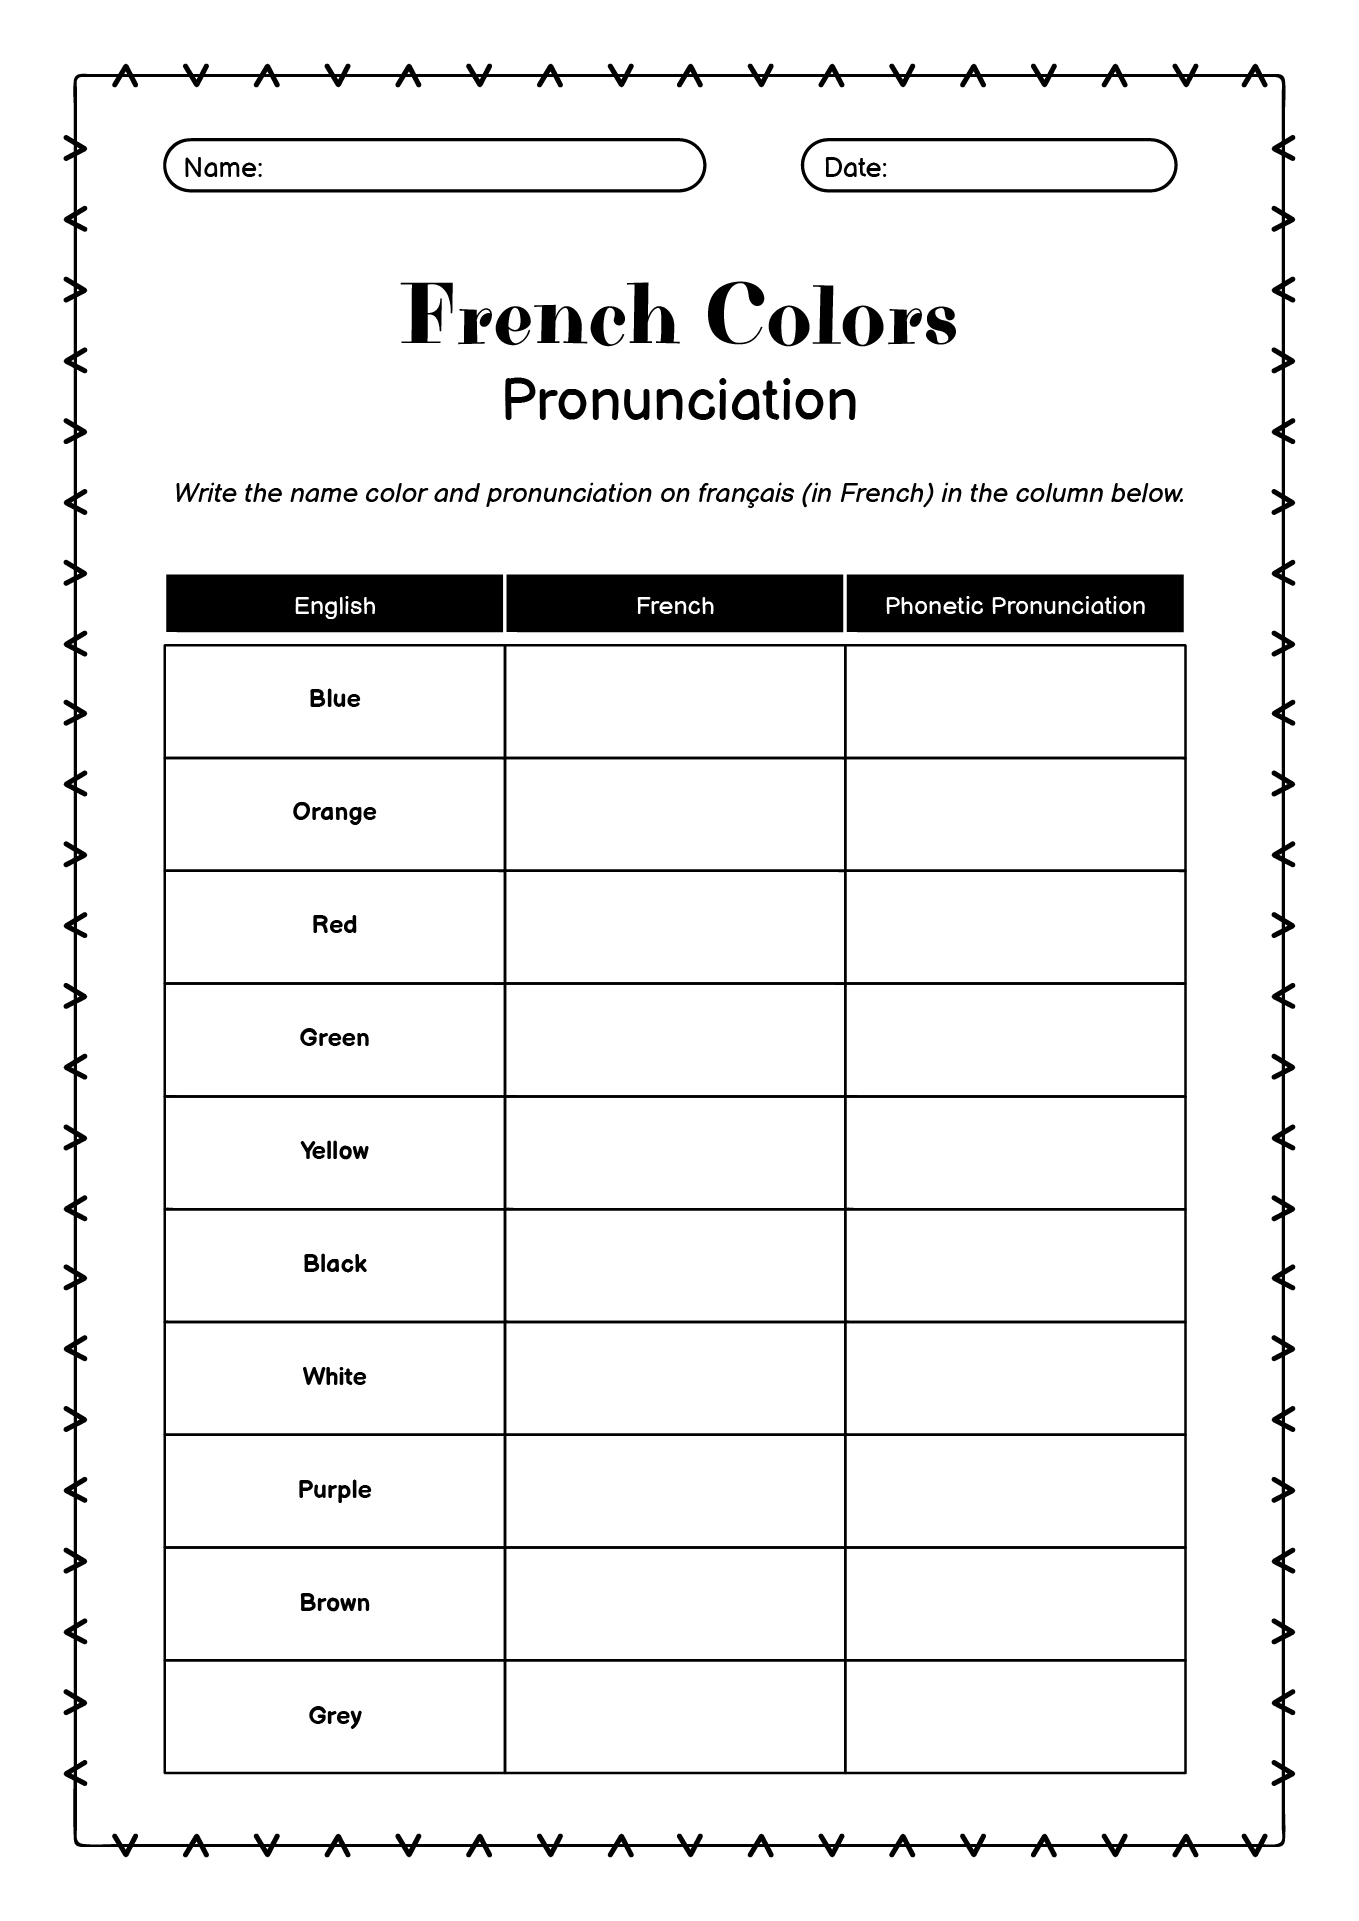 Basic French Colors and Pronunciation Worksheet